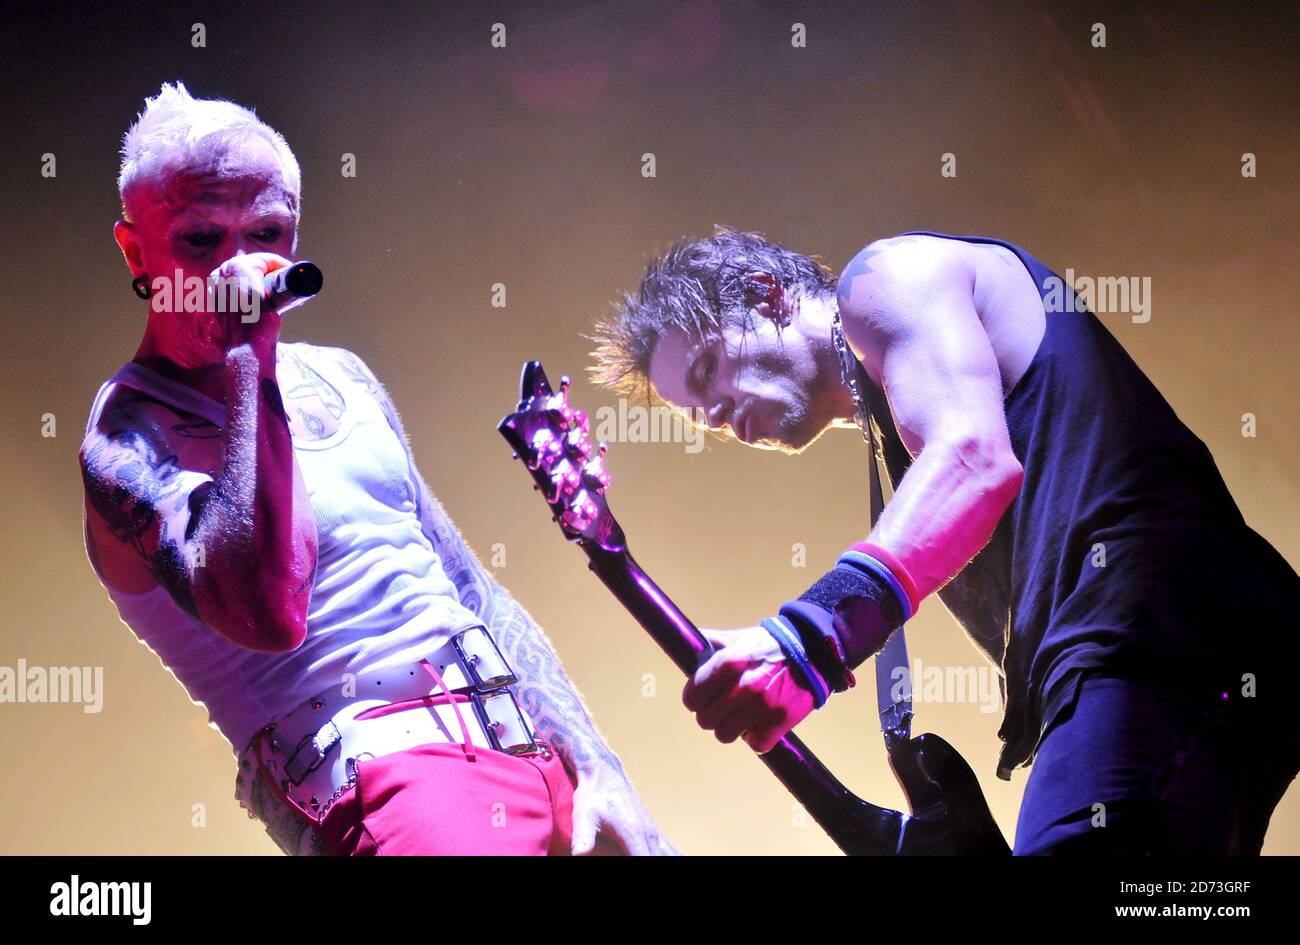 Keith Flint and Liam Howlett of The Prodigy on stage at Wembley Arena in north London Stock Photo